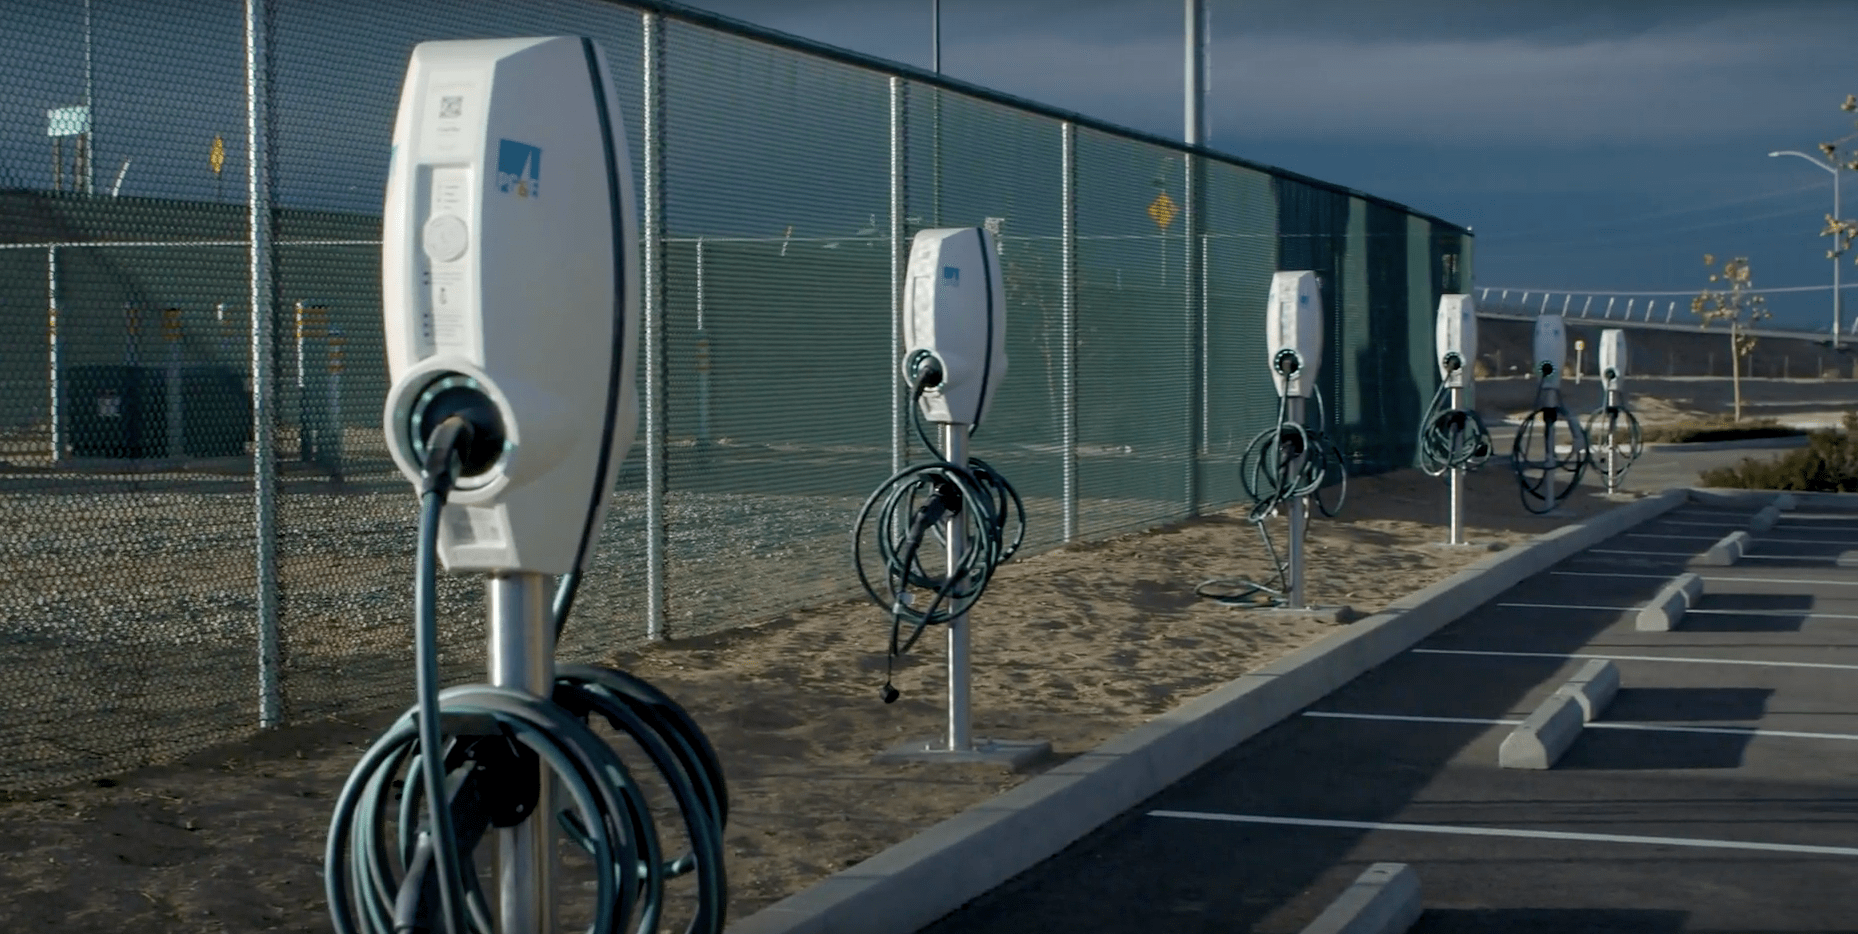 6 EVBox BusinessLine charging stations installed in California, at Outlets at Tejon.